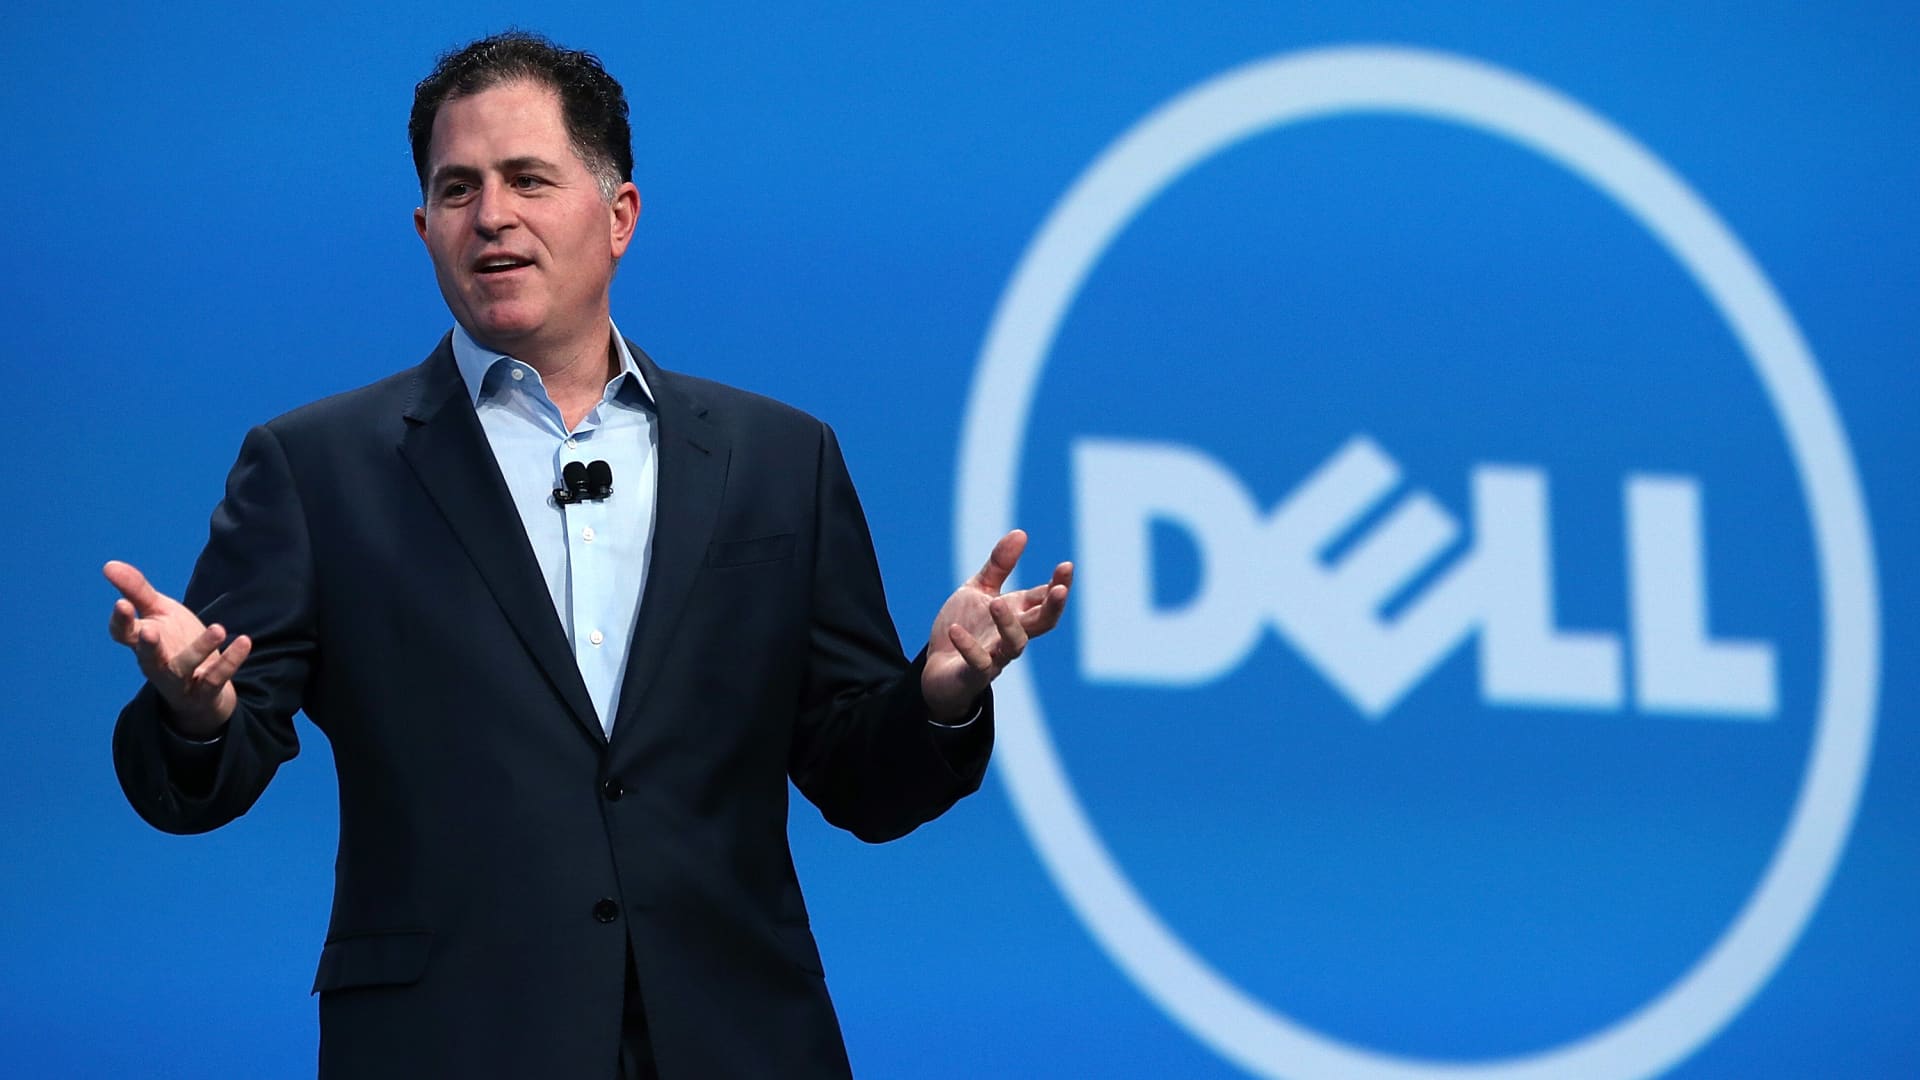 Dell shares have finest working day since return to inventory industry in 2018